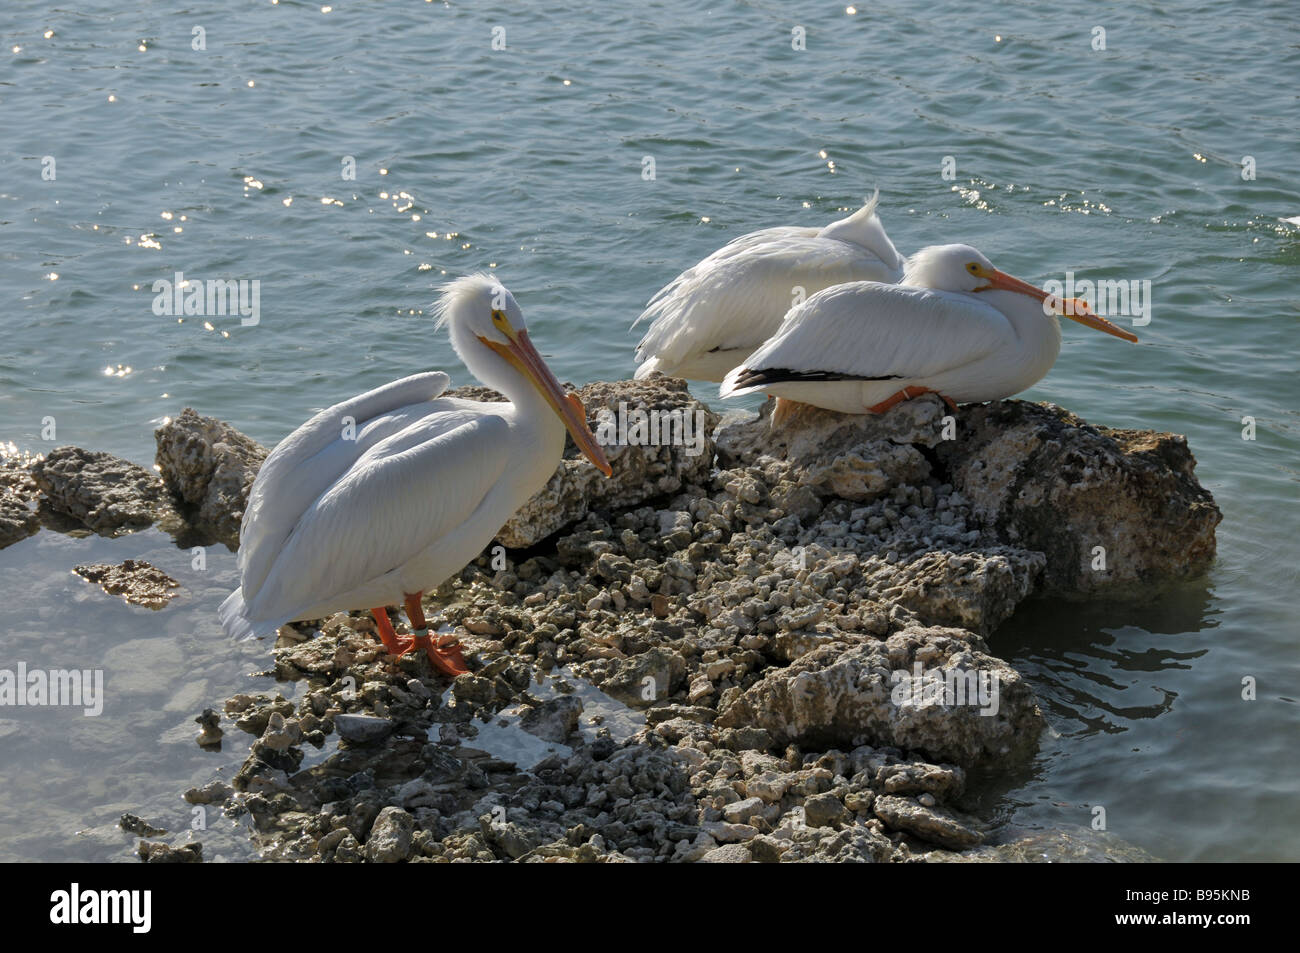 American White Pelicans resting on rocks. Stock Photo